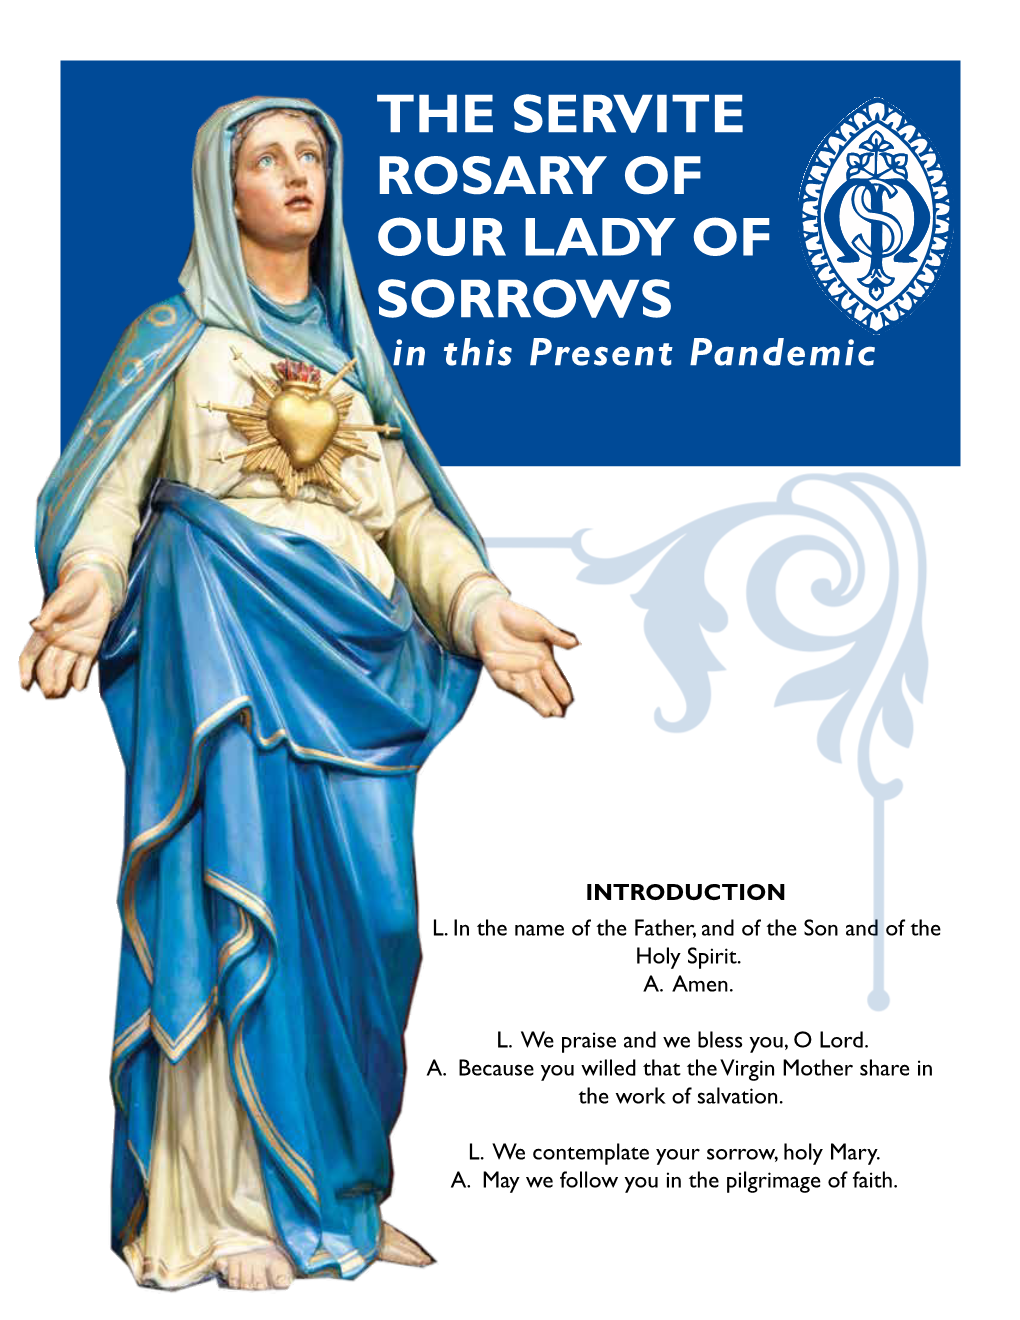 THE SERVITE ROSARY of OUR LADY of SORROWS in This Present Pandemic